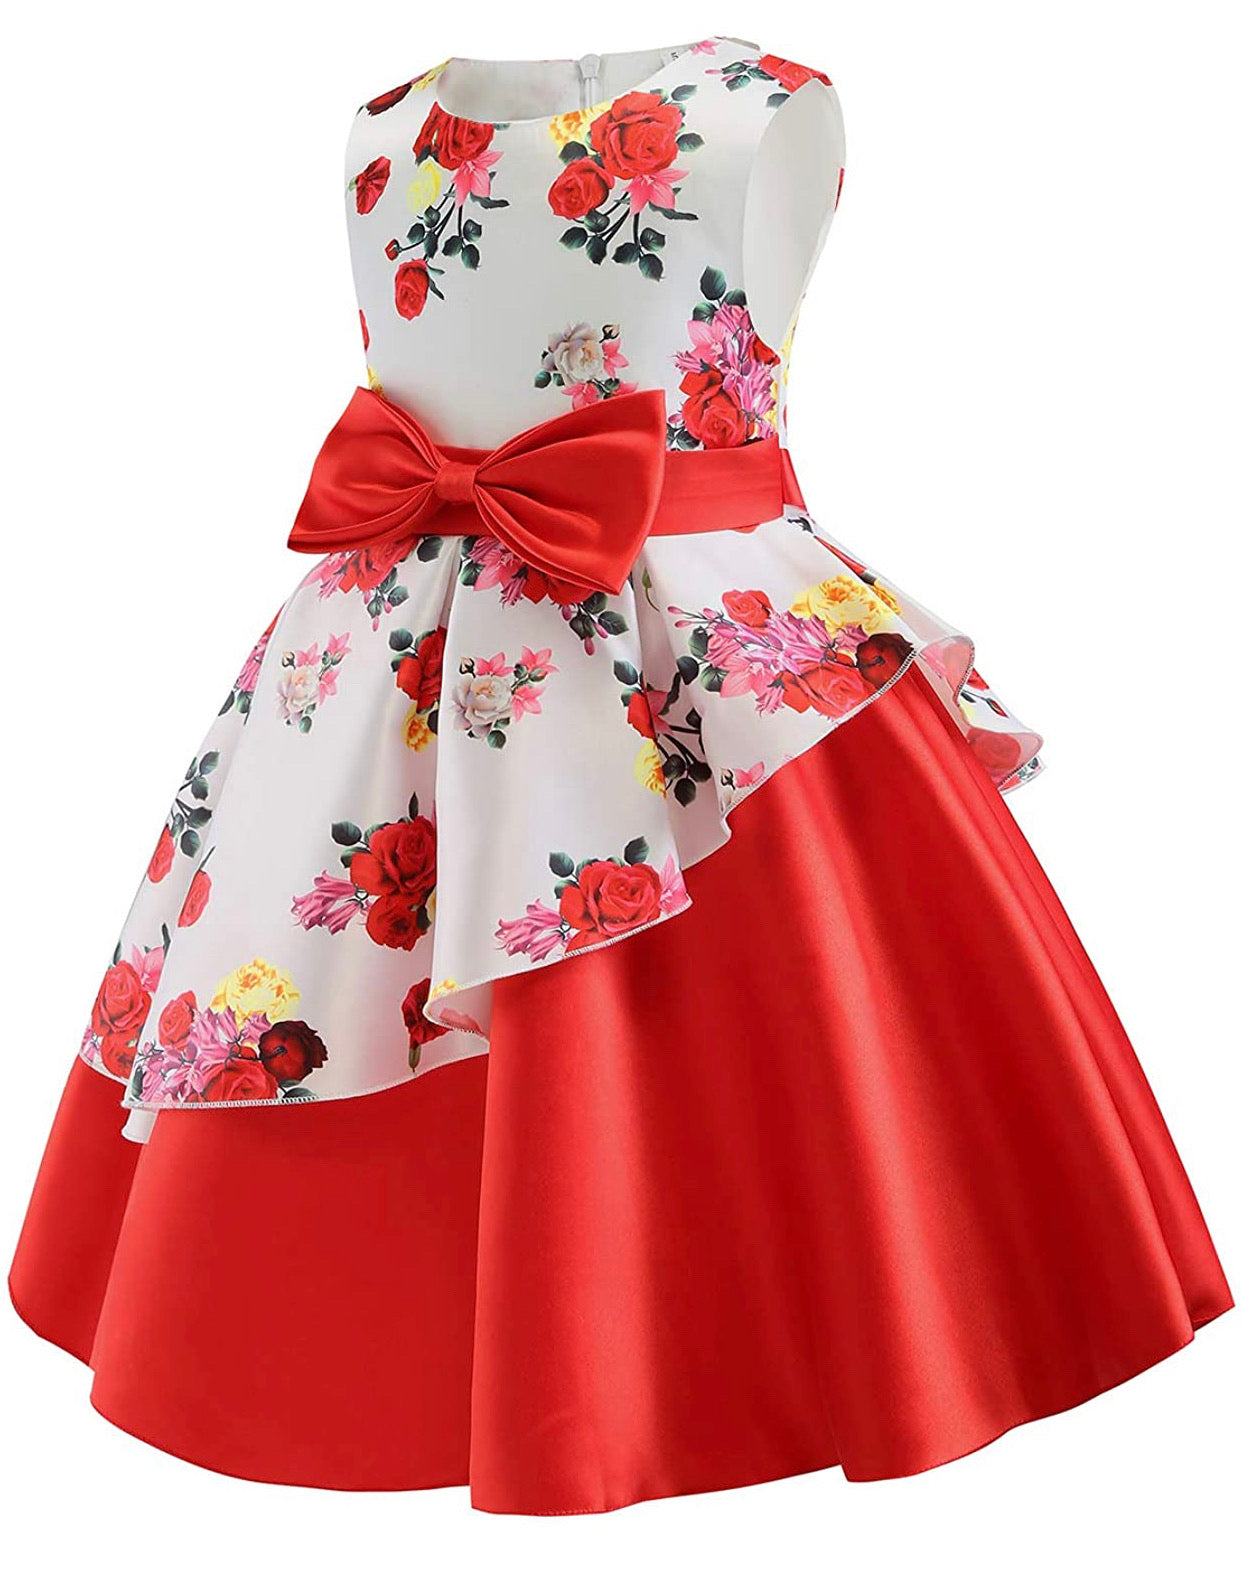 Little Girl’s Formal Floral Print Dress, Sizes 2T - 9 years (Red ...